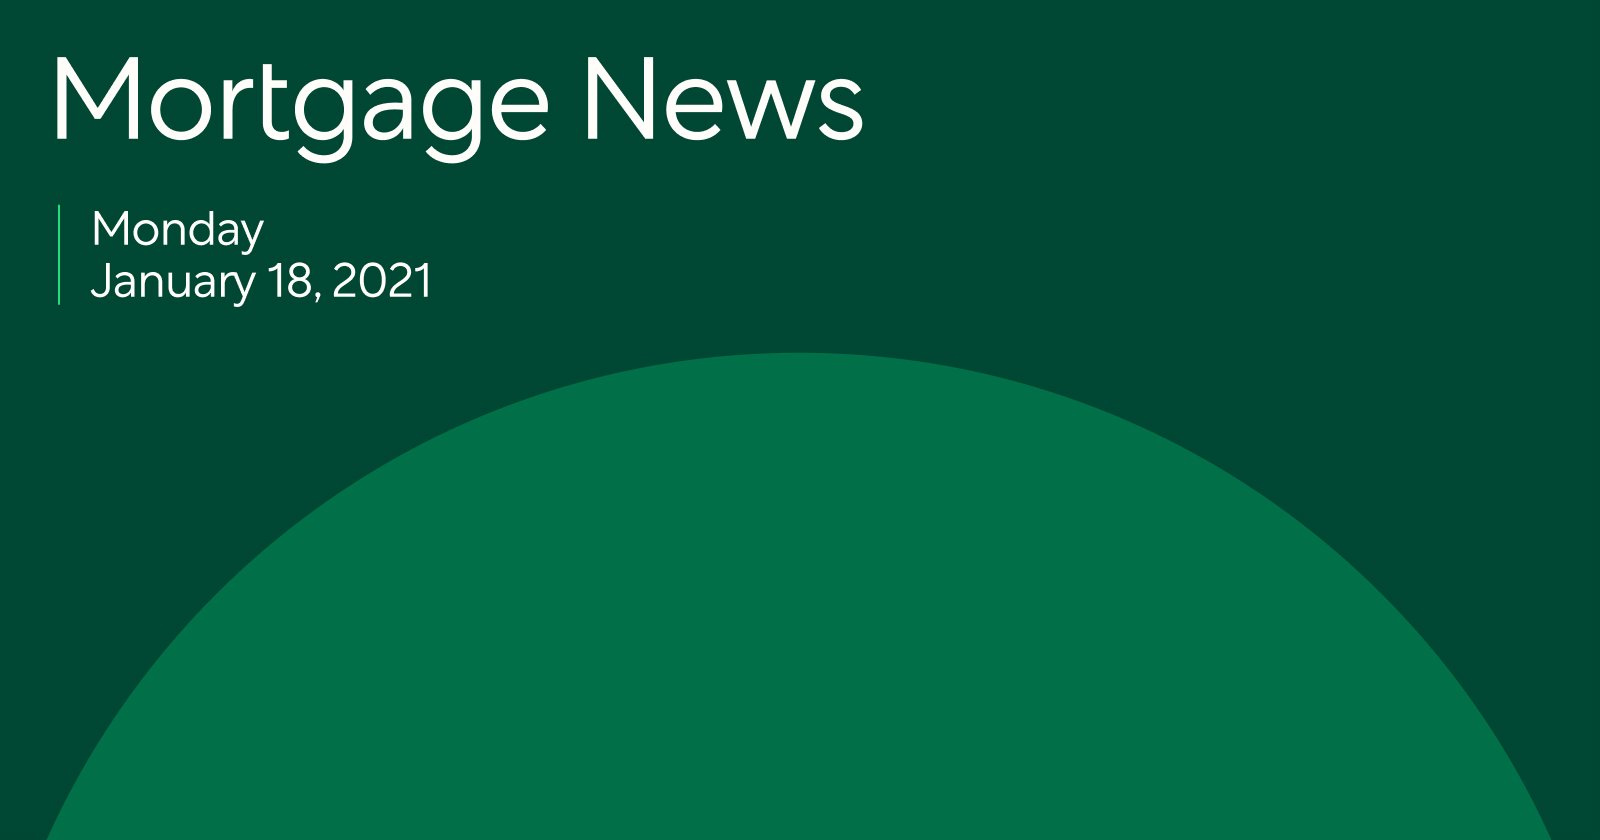 Mortgage News 1/18/2021: Rates Drop, But May Not Stay Down For Long